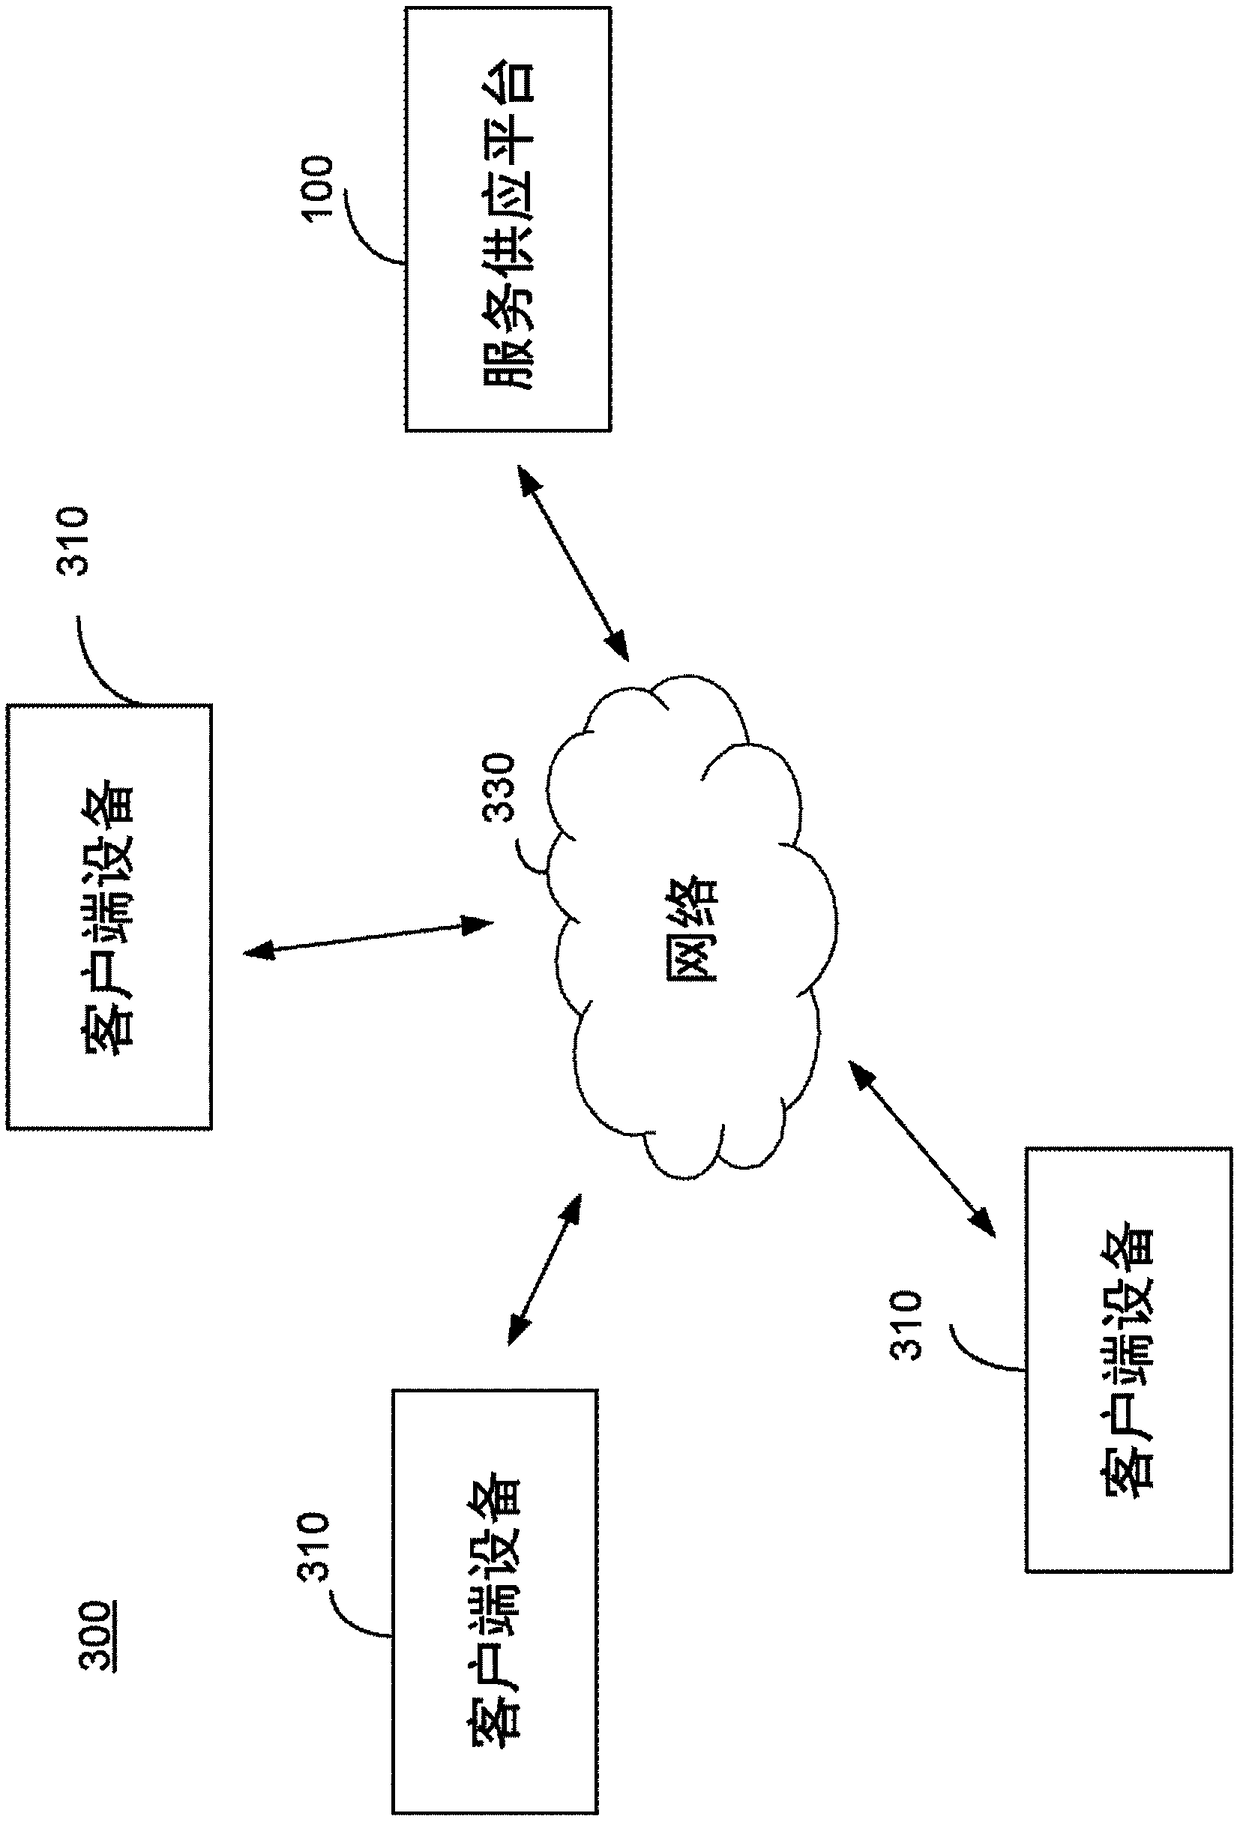 Method and apparatus for declarative action orchestration